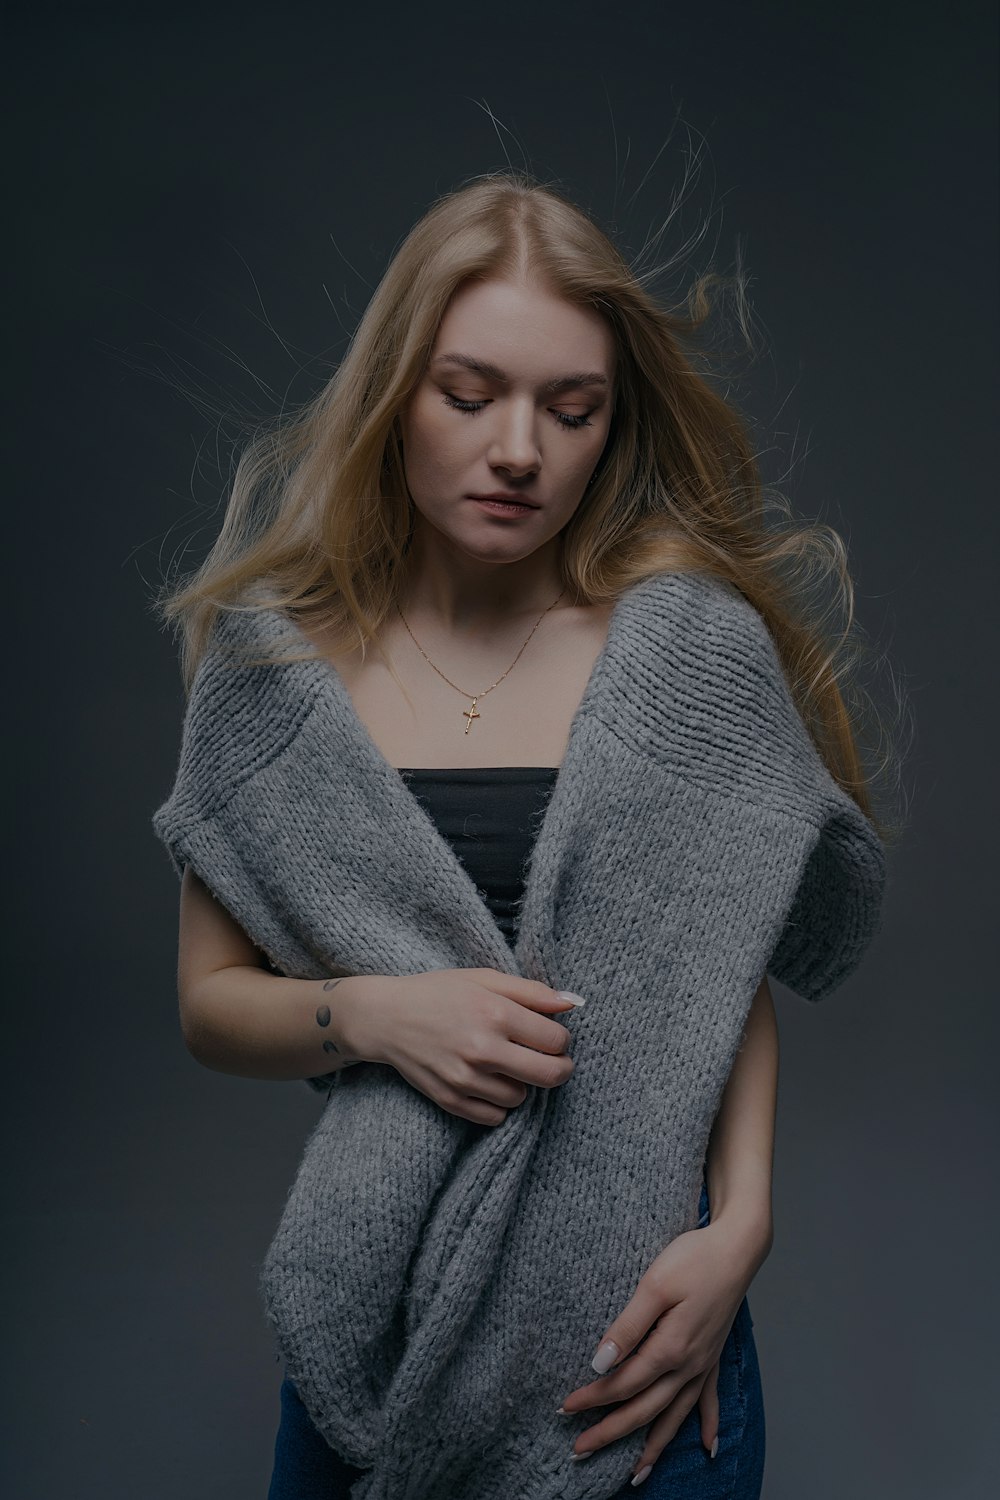 a woman with long hair wearing a gray sweater